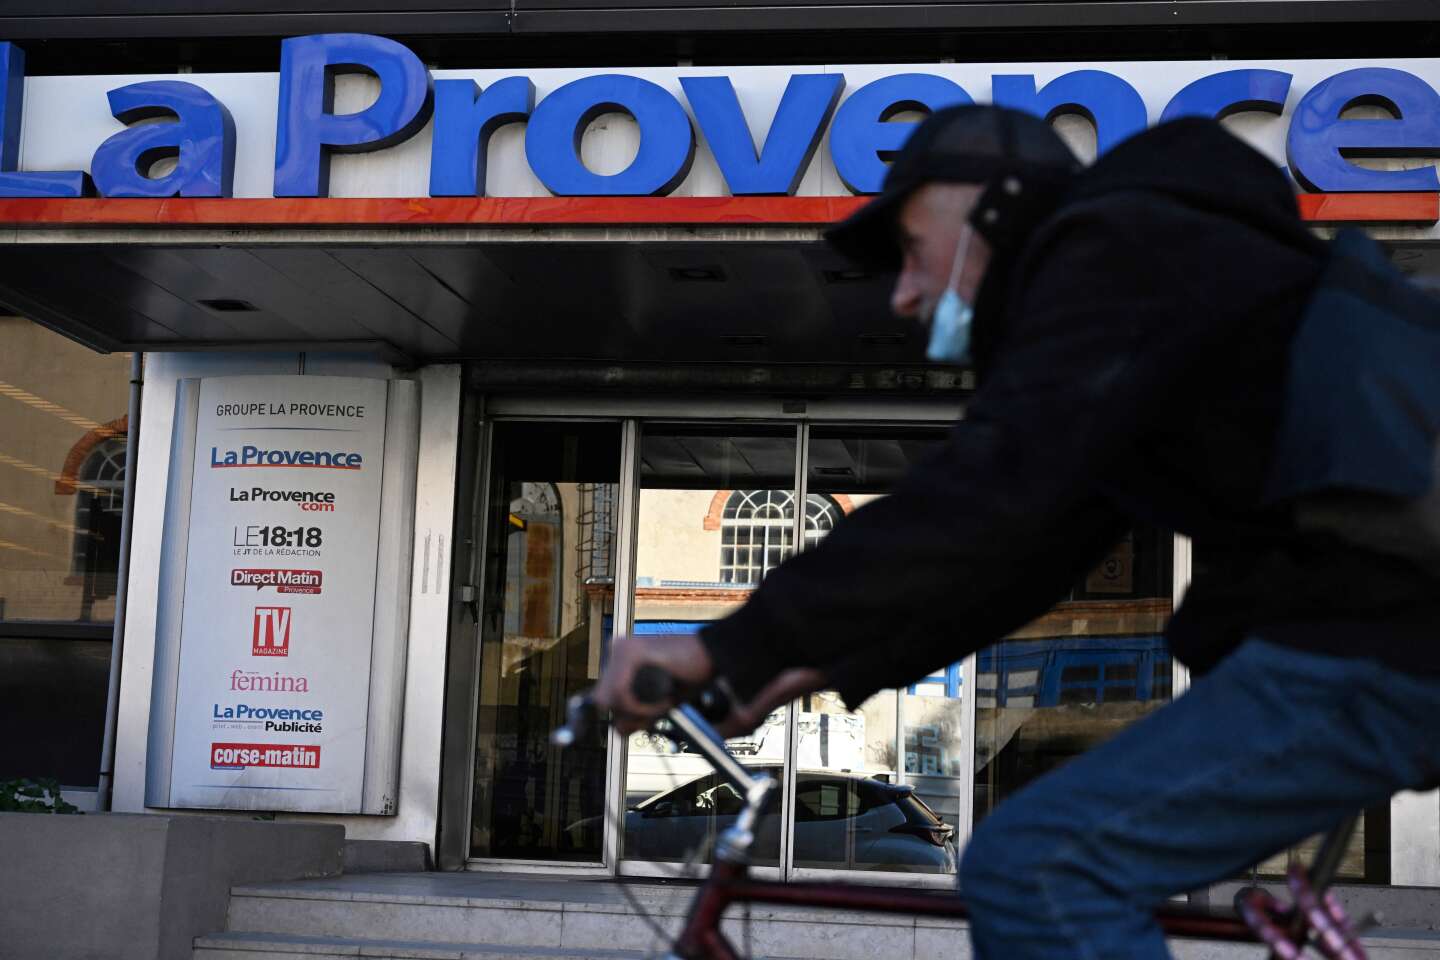 The newspaper “La Provence” deprived of electricity, a cut claimed by the CGT Energie